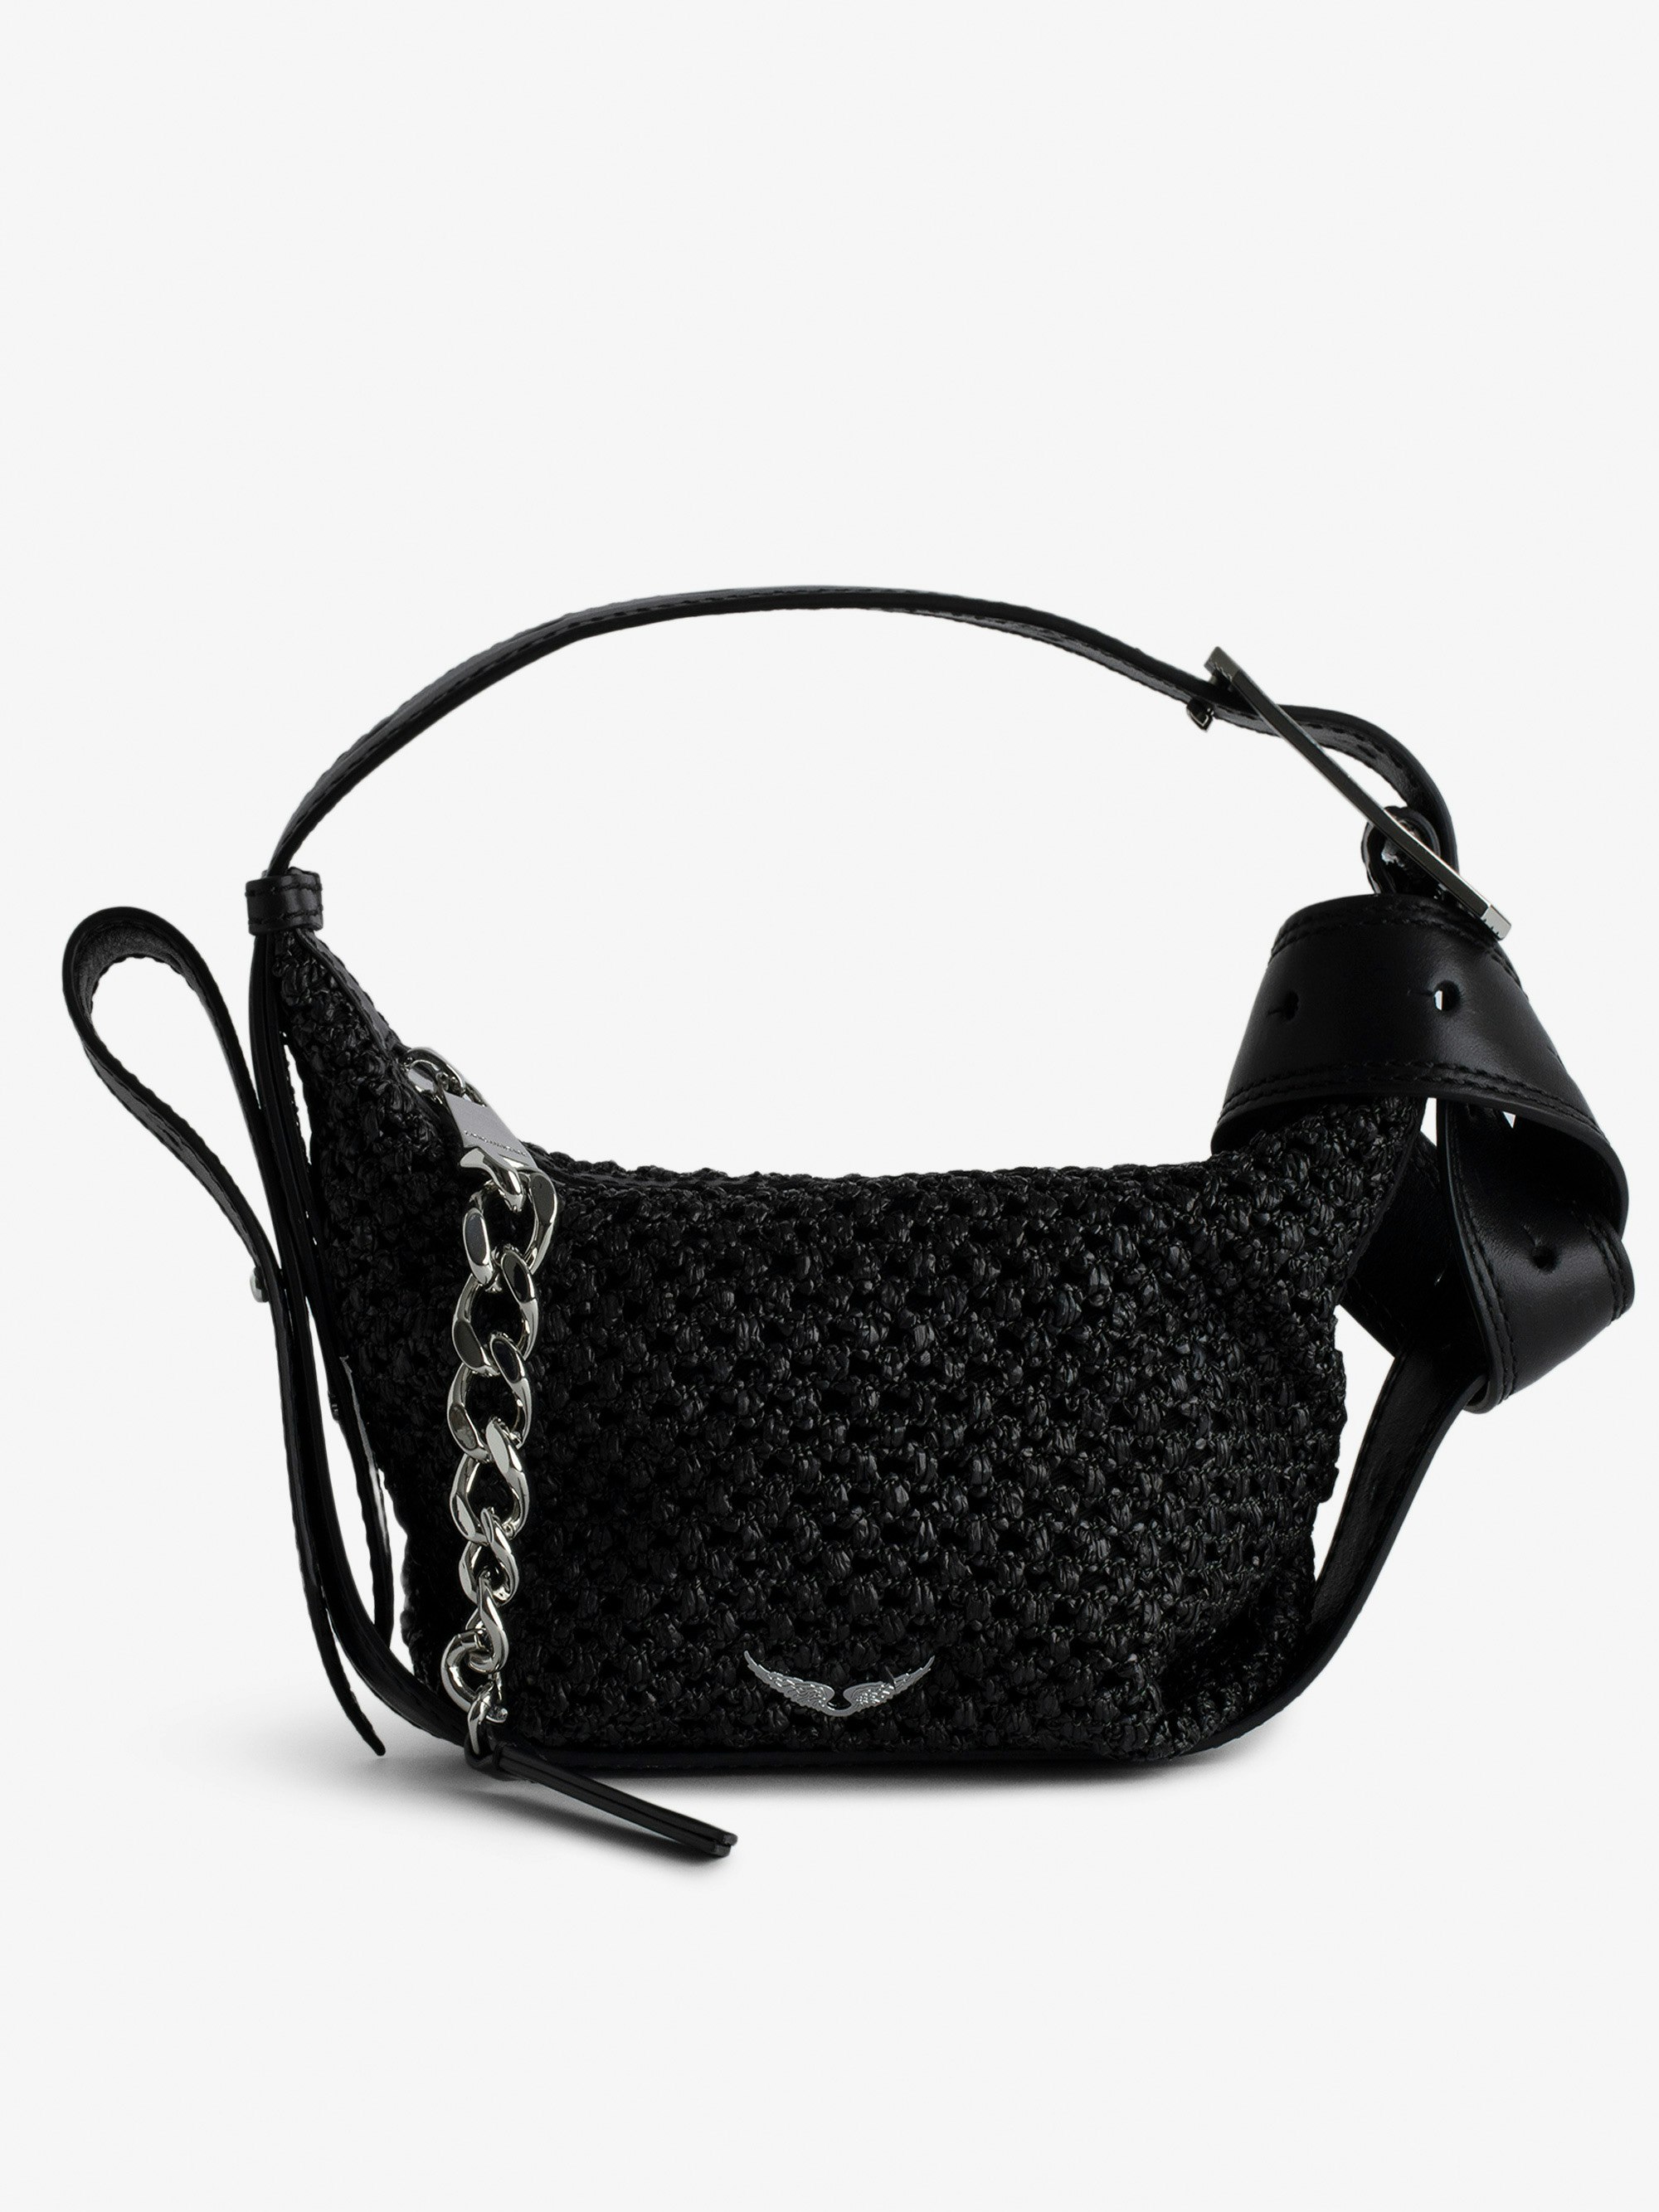 Le Cecilia XS Bag - Small black basket-style bag with leather shoulder strap and metallic C buckle.